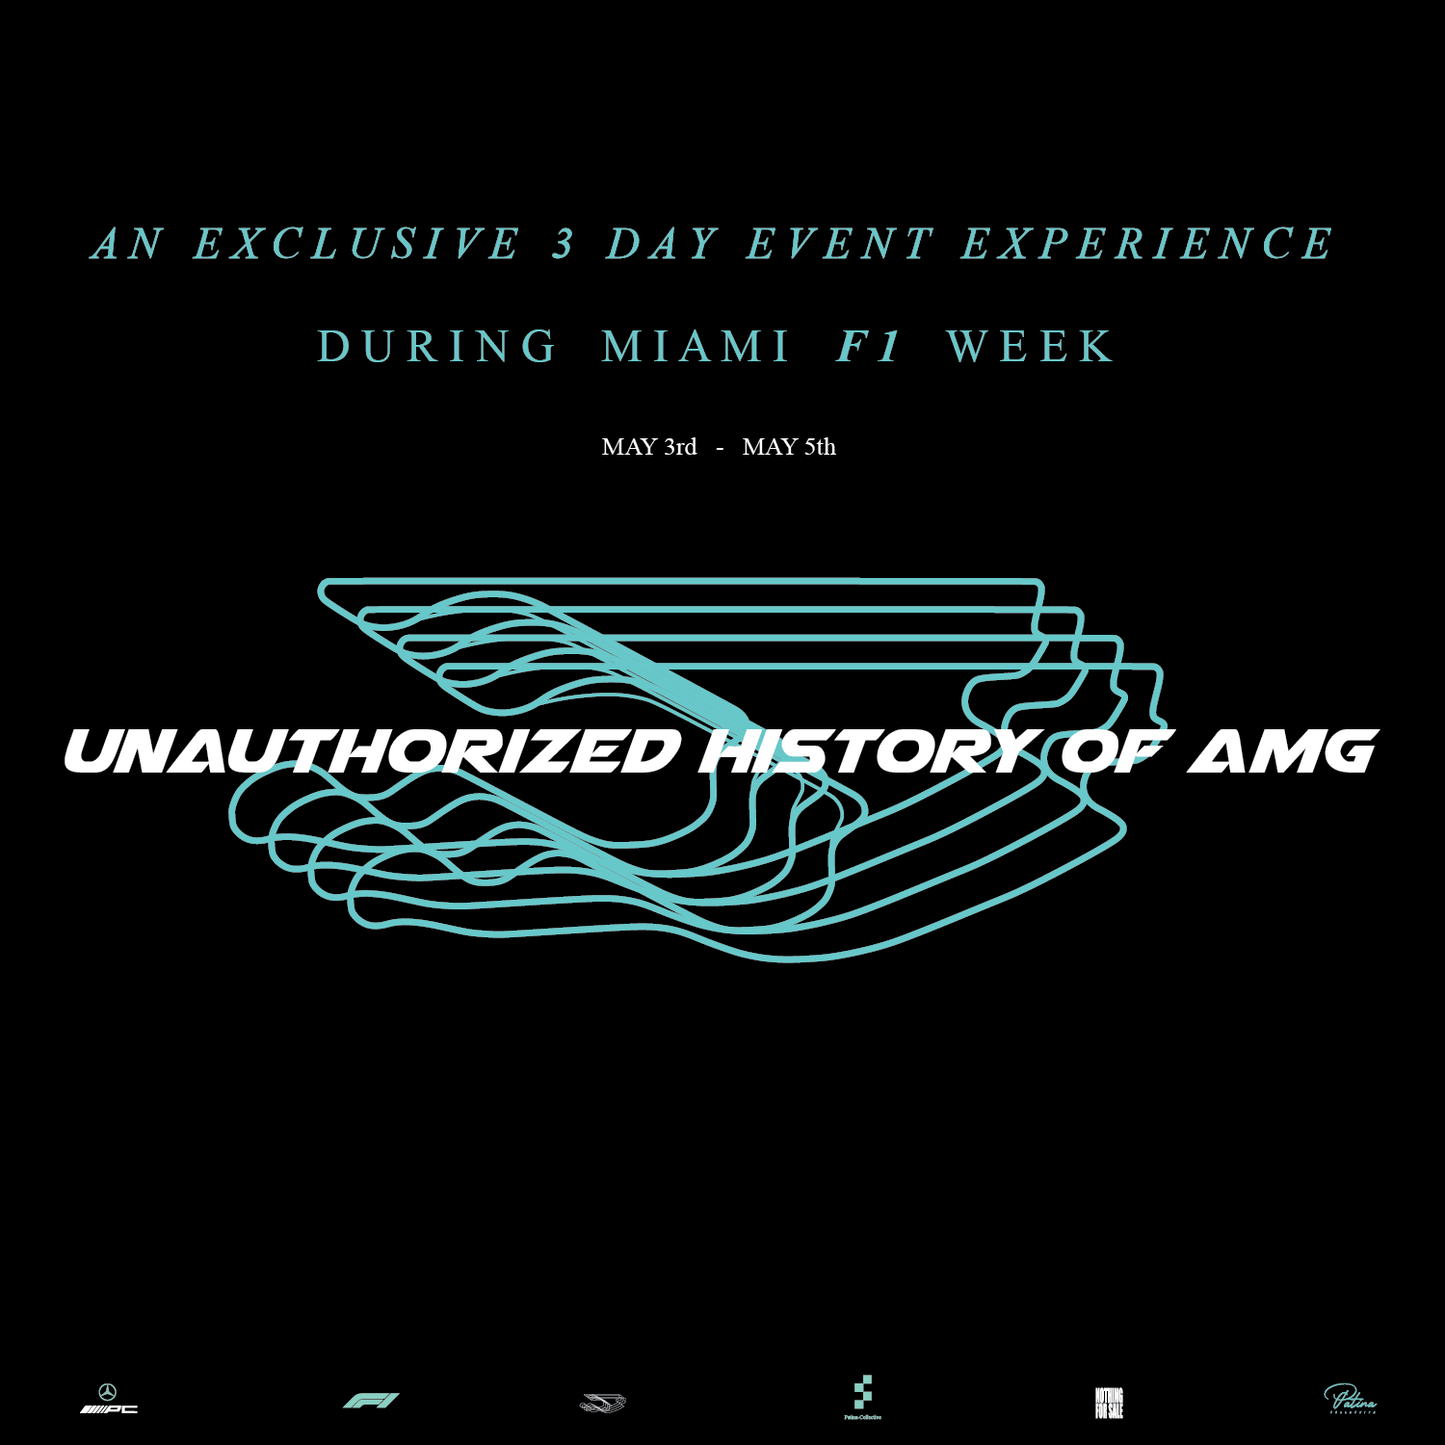 The "Unauthorized History of AMG" Experience